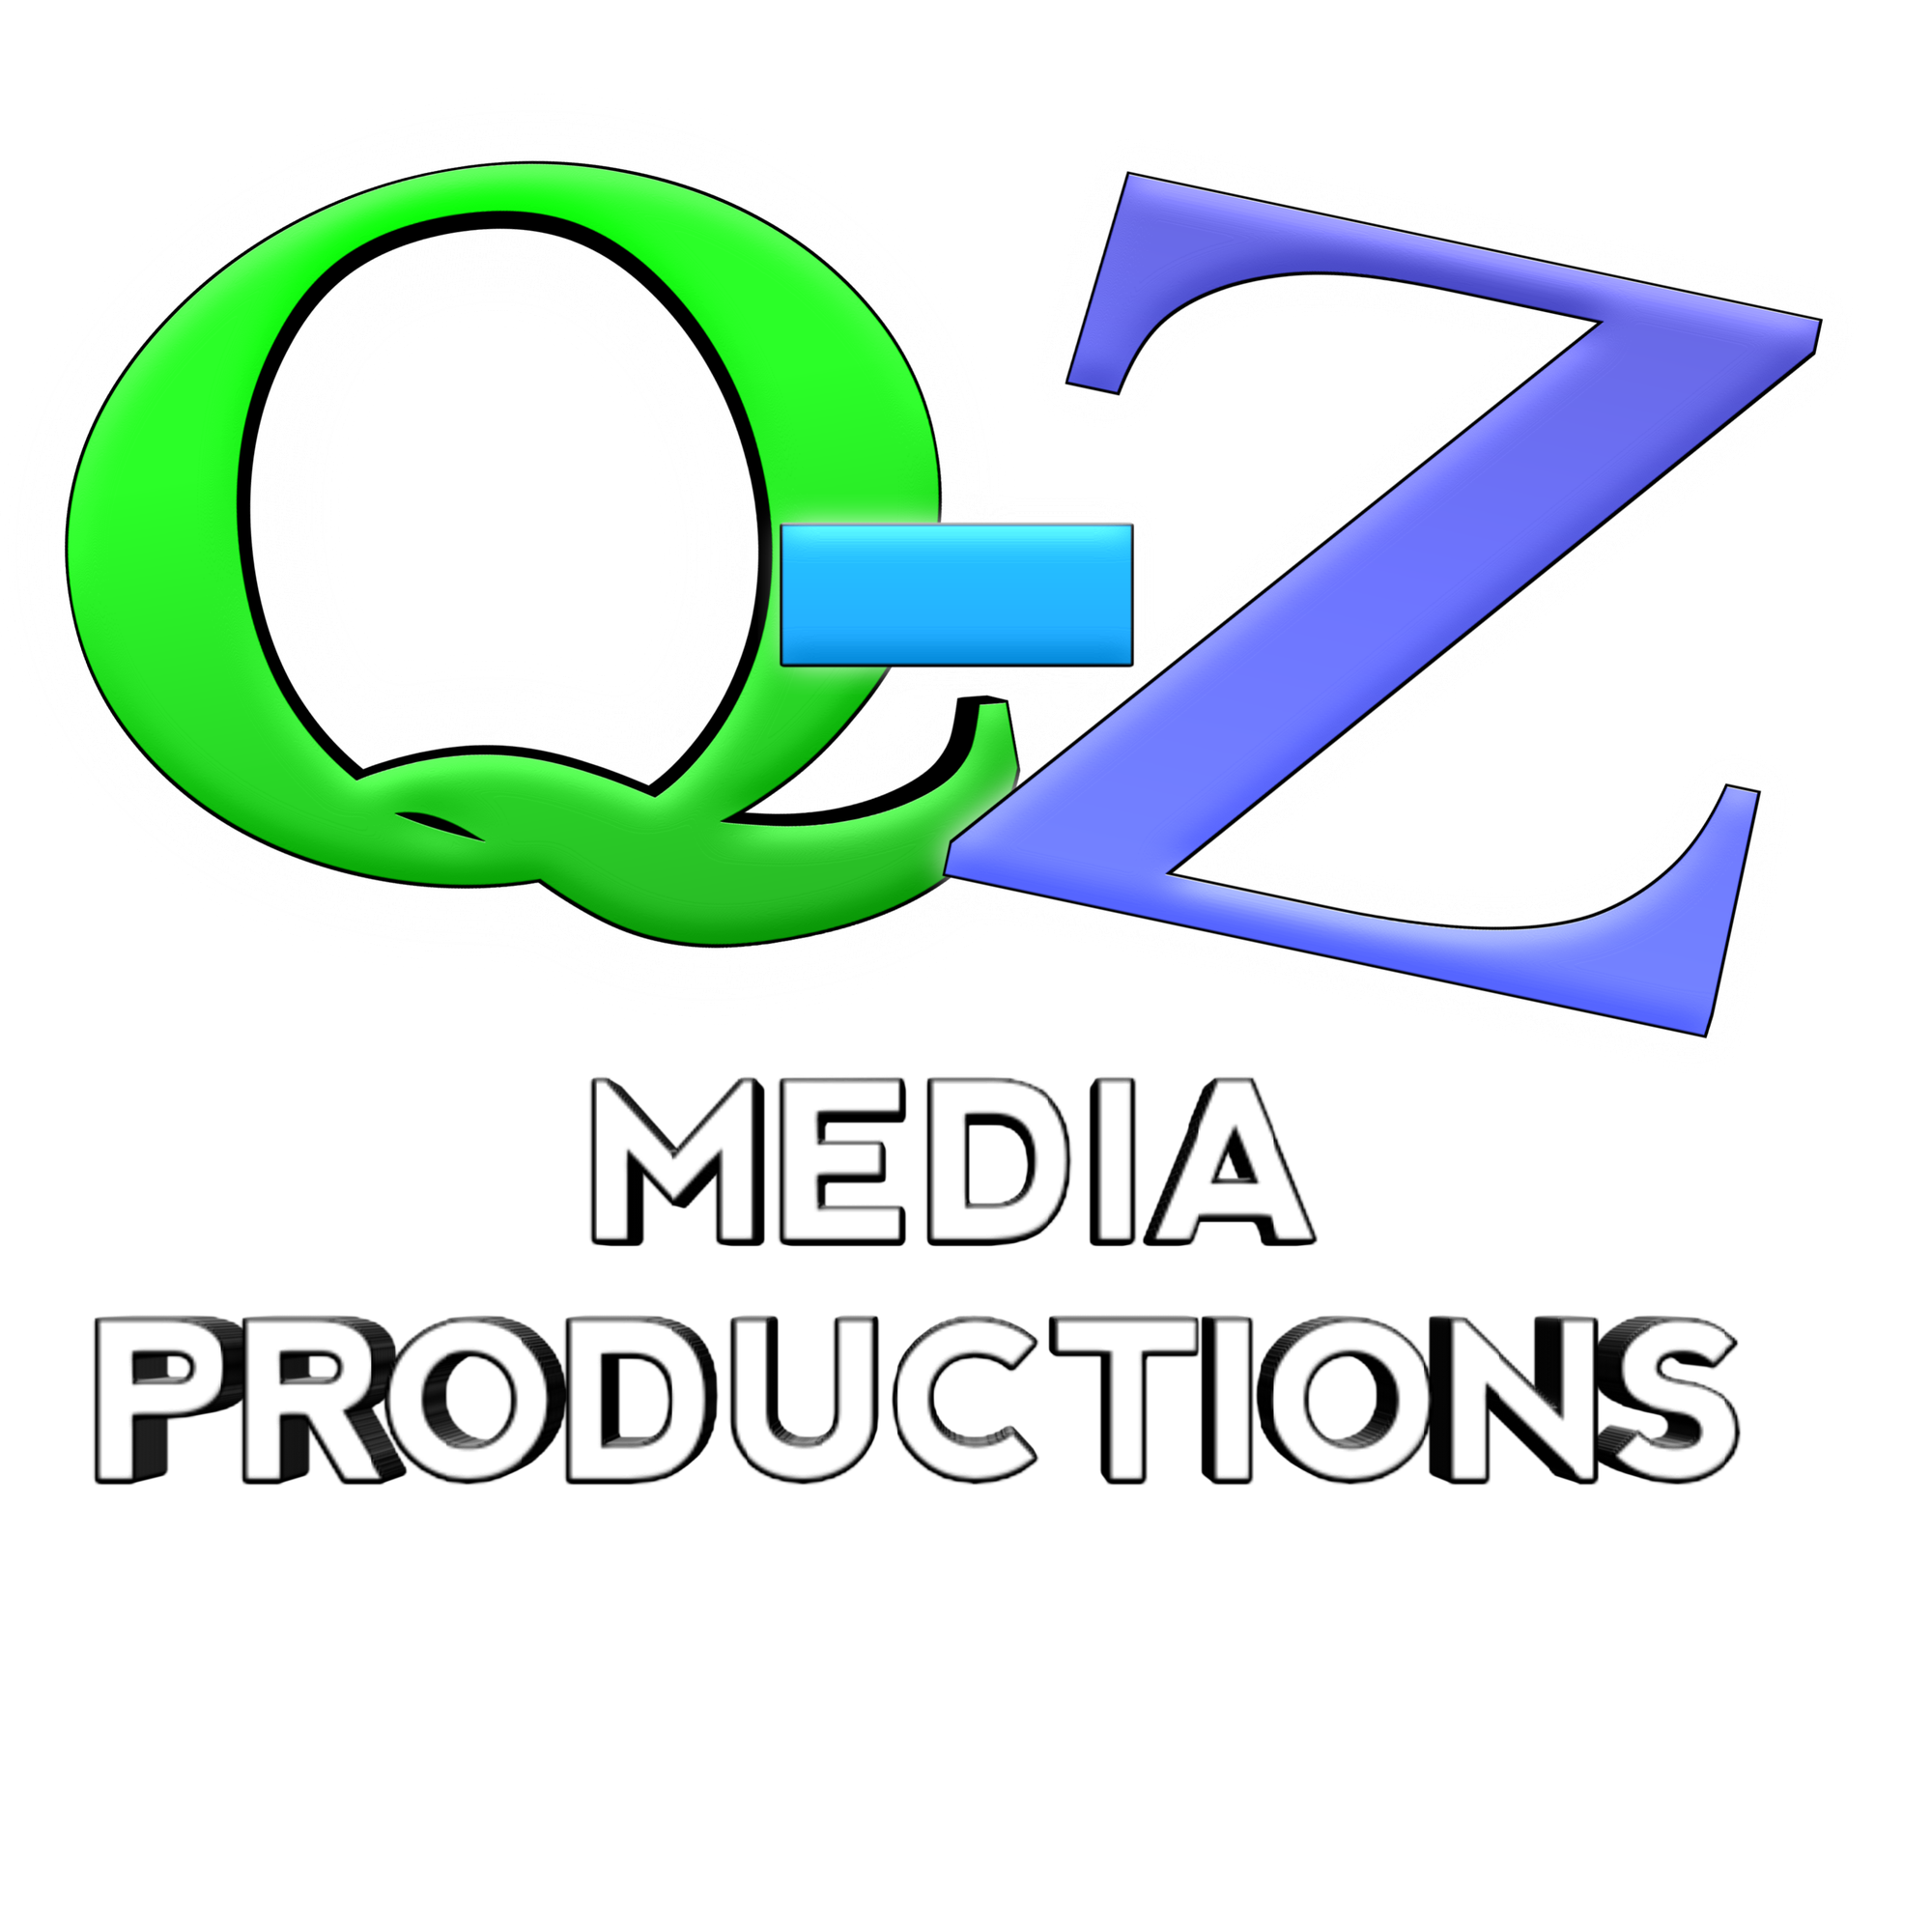 The logo for "Q-Z Media Productions".